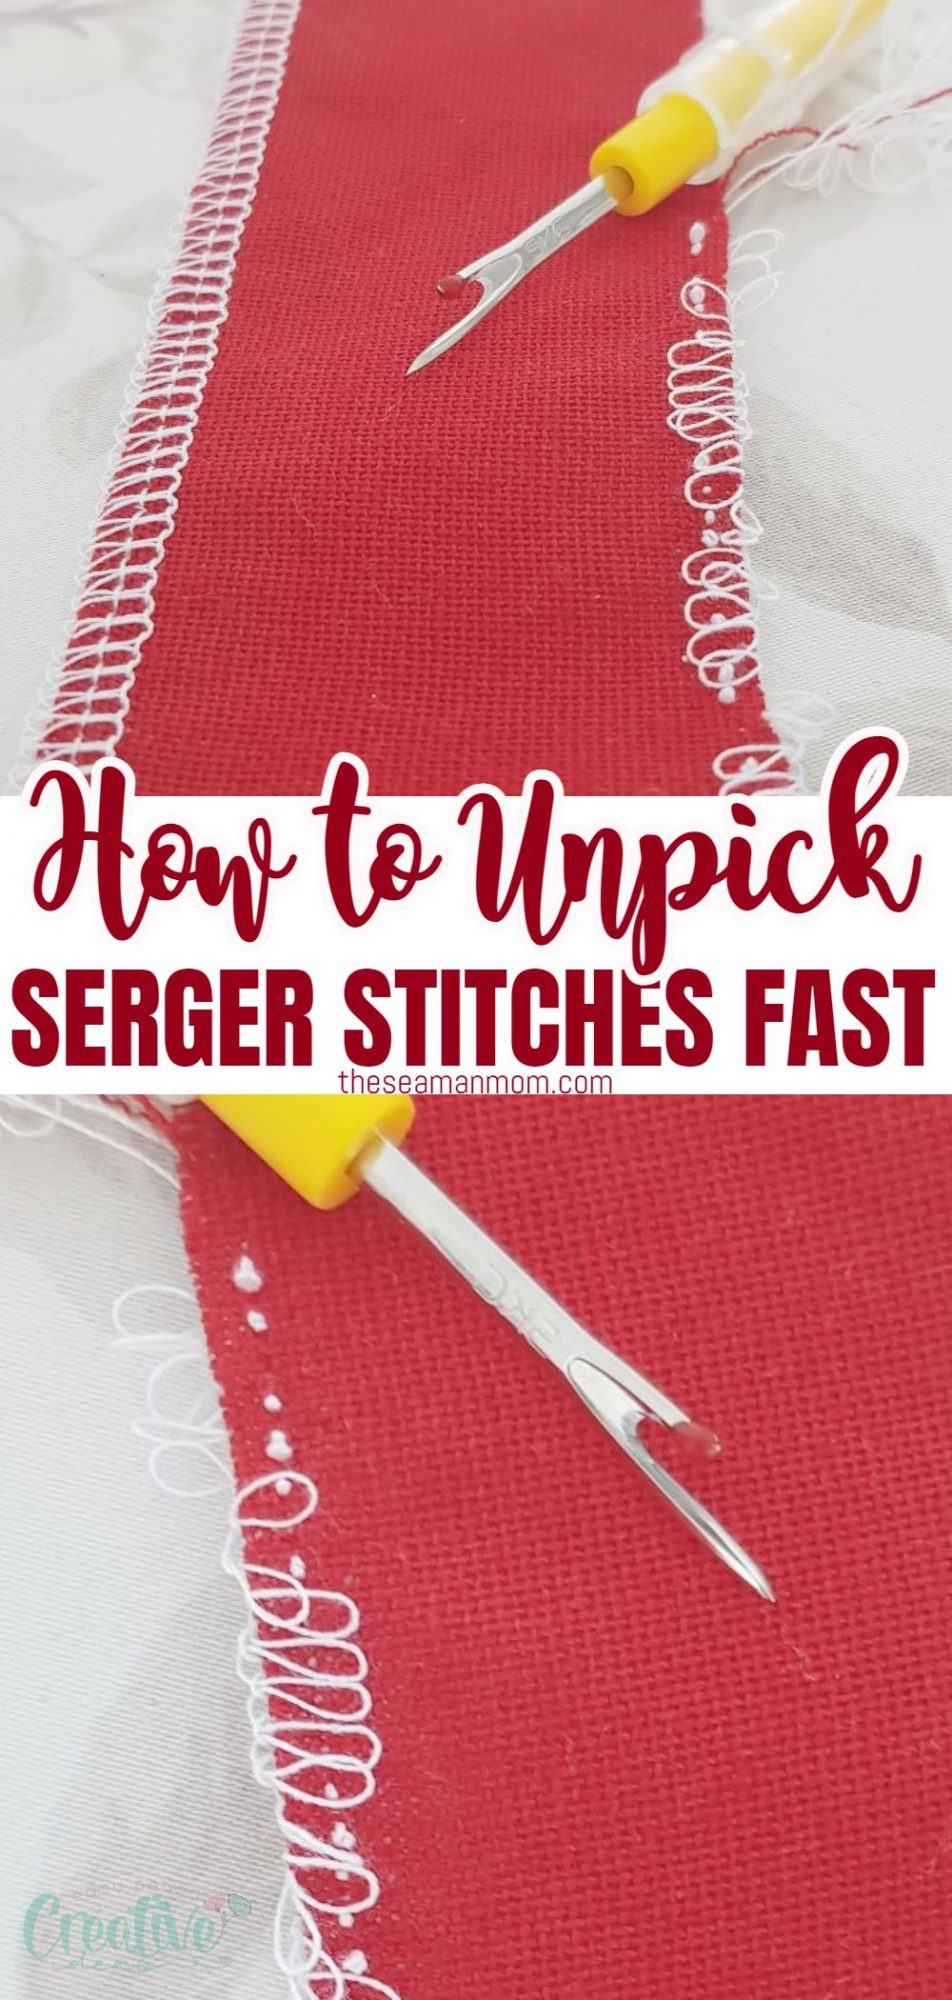 Photo collage illustrating how to remove serger stitches faster and easier